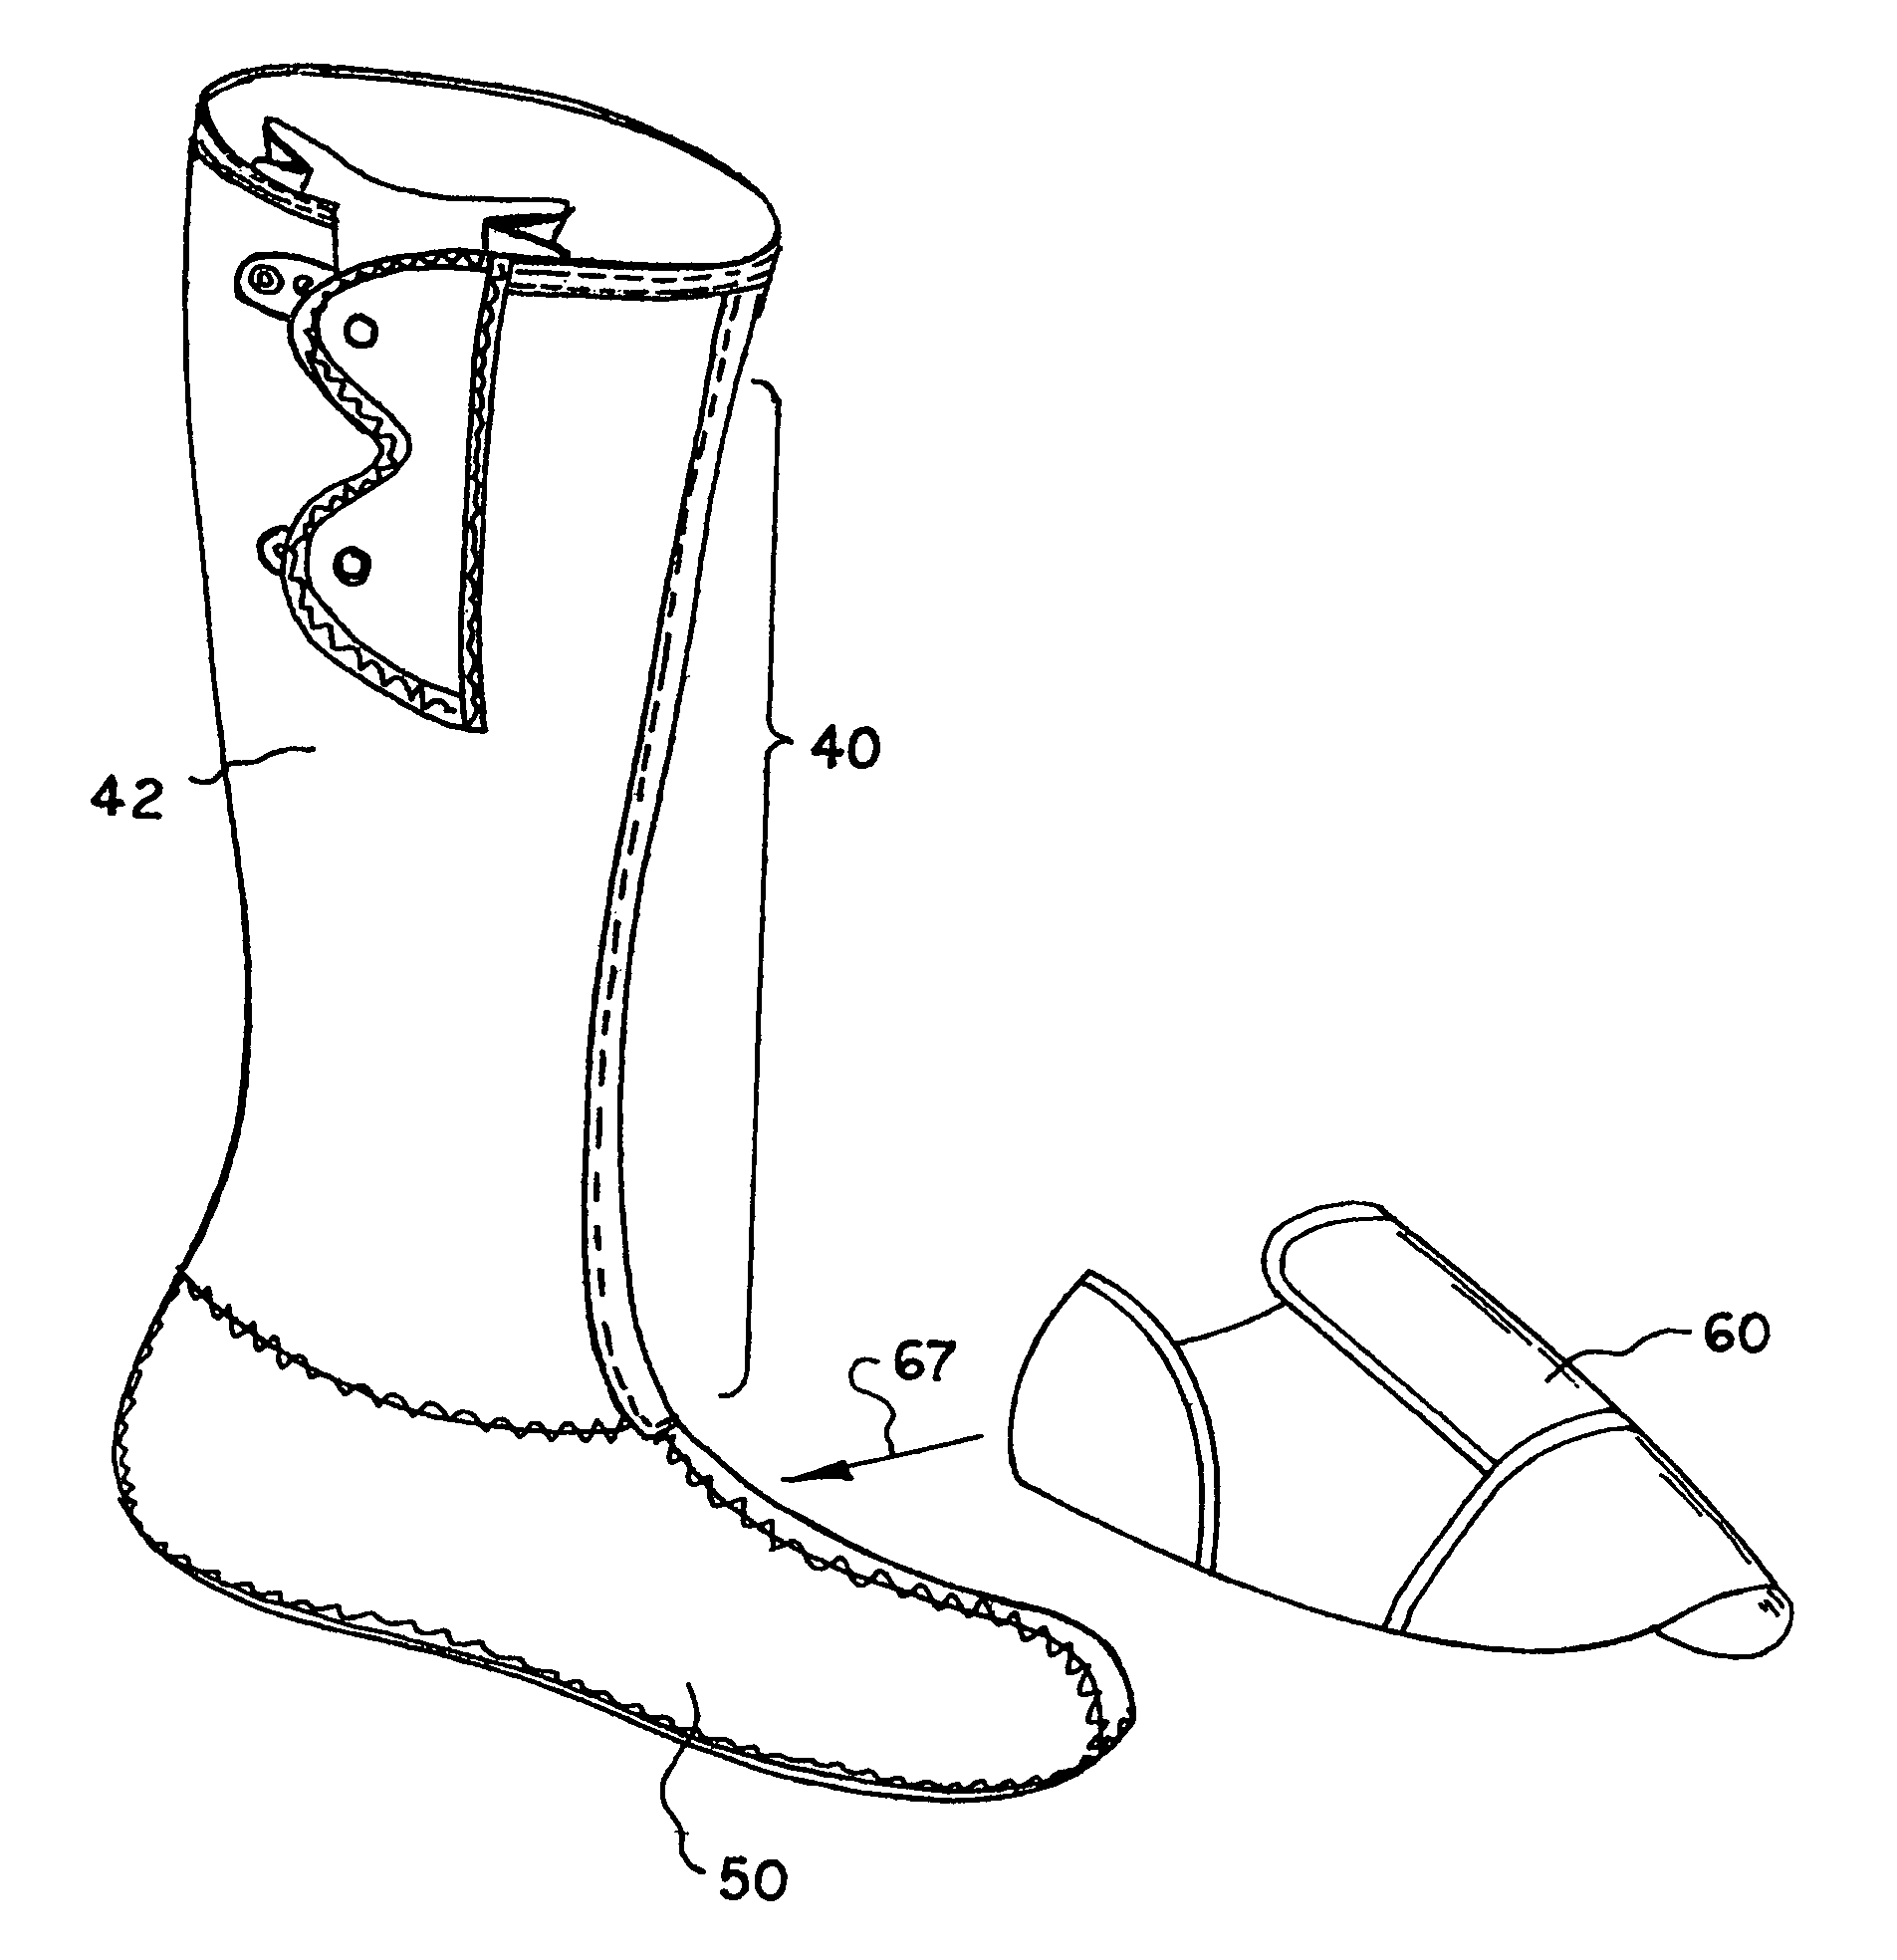 Footwear and its manufacture